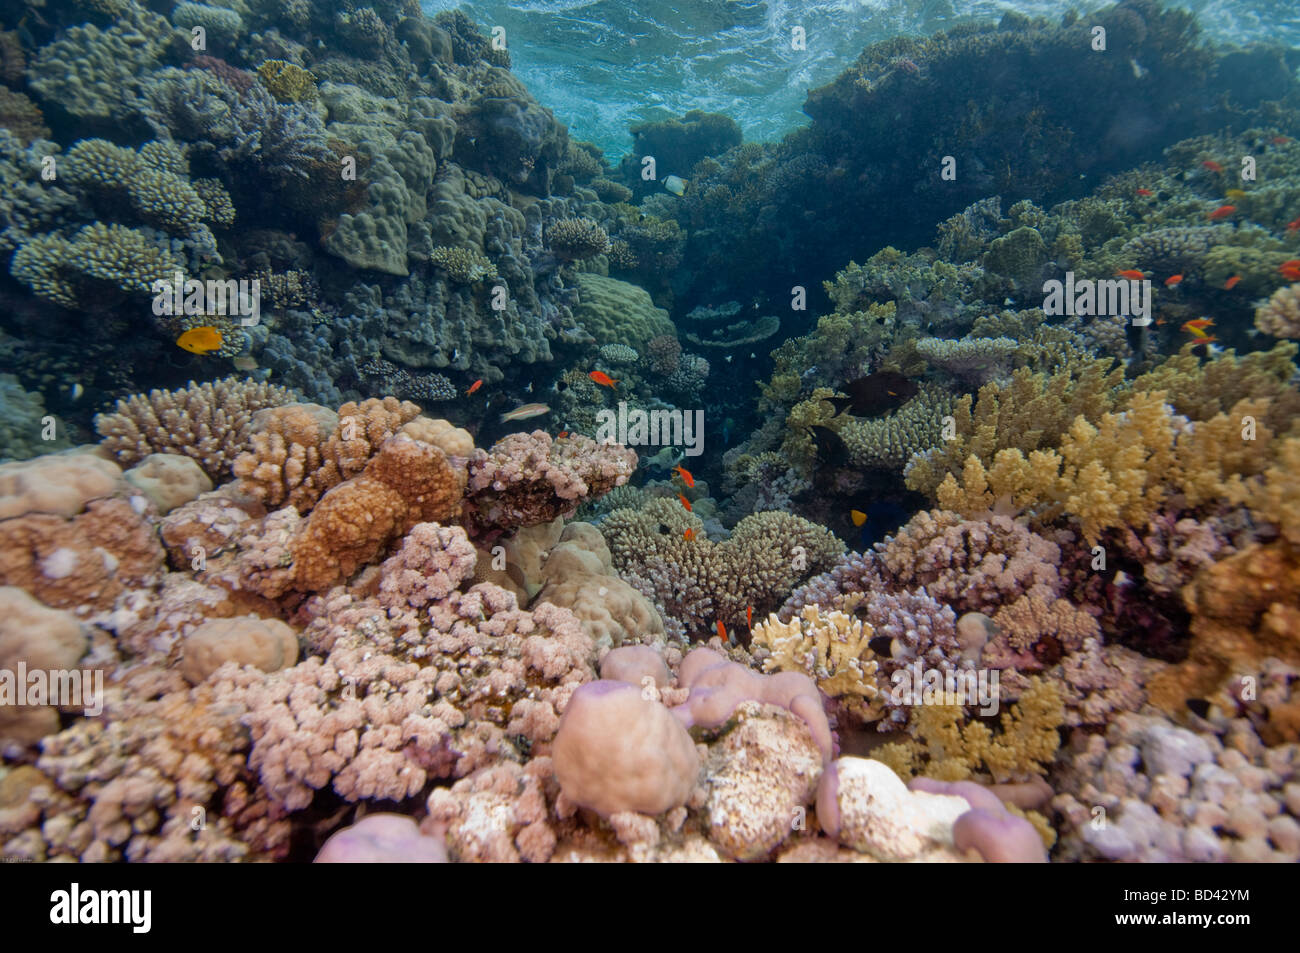 One of the many underwater views in the Red Sea near Sharm El Sheilk ...